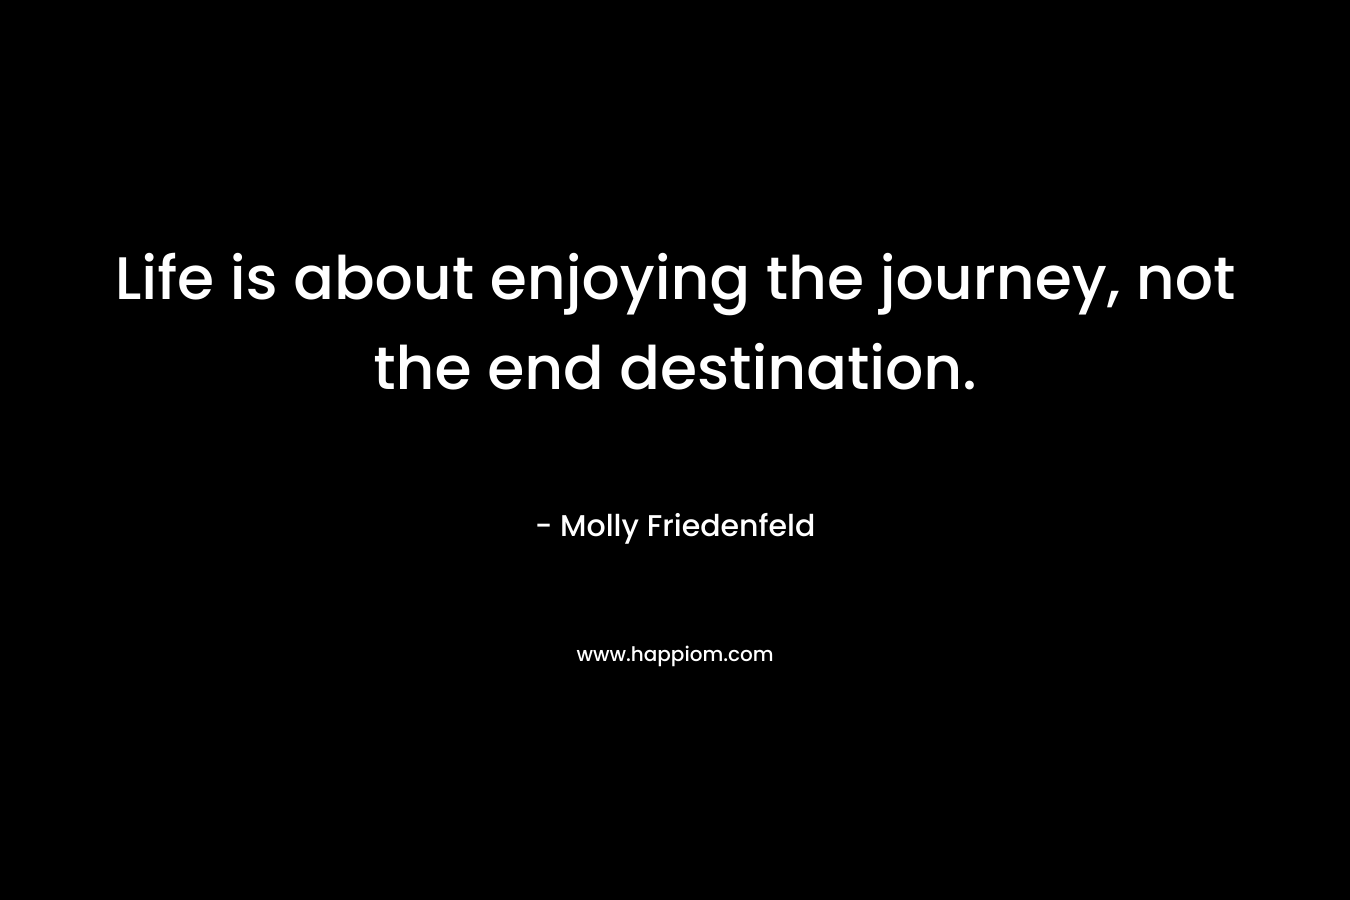 Life is about enjoying the journey, not the end destination. – Molly Friedenfeld